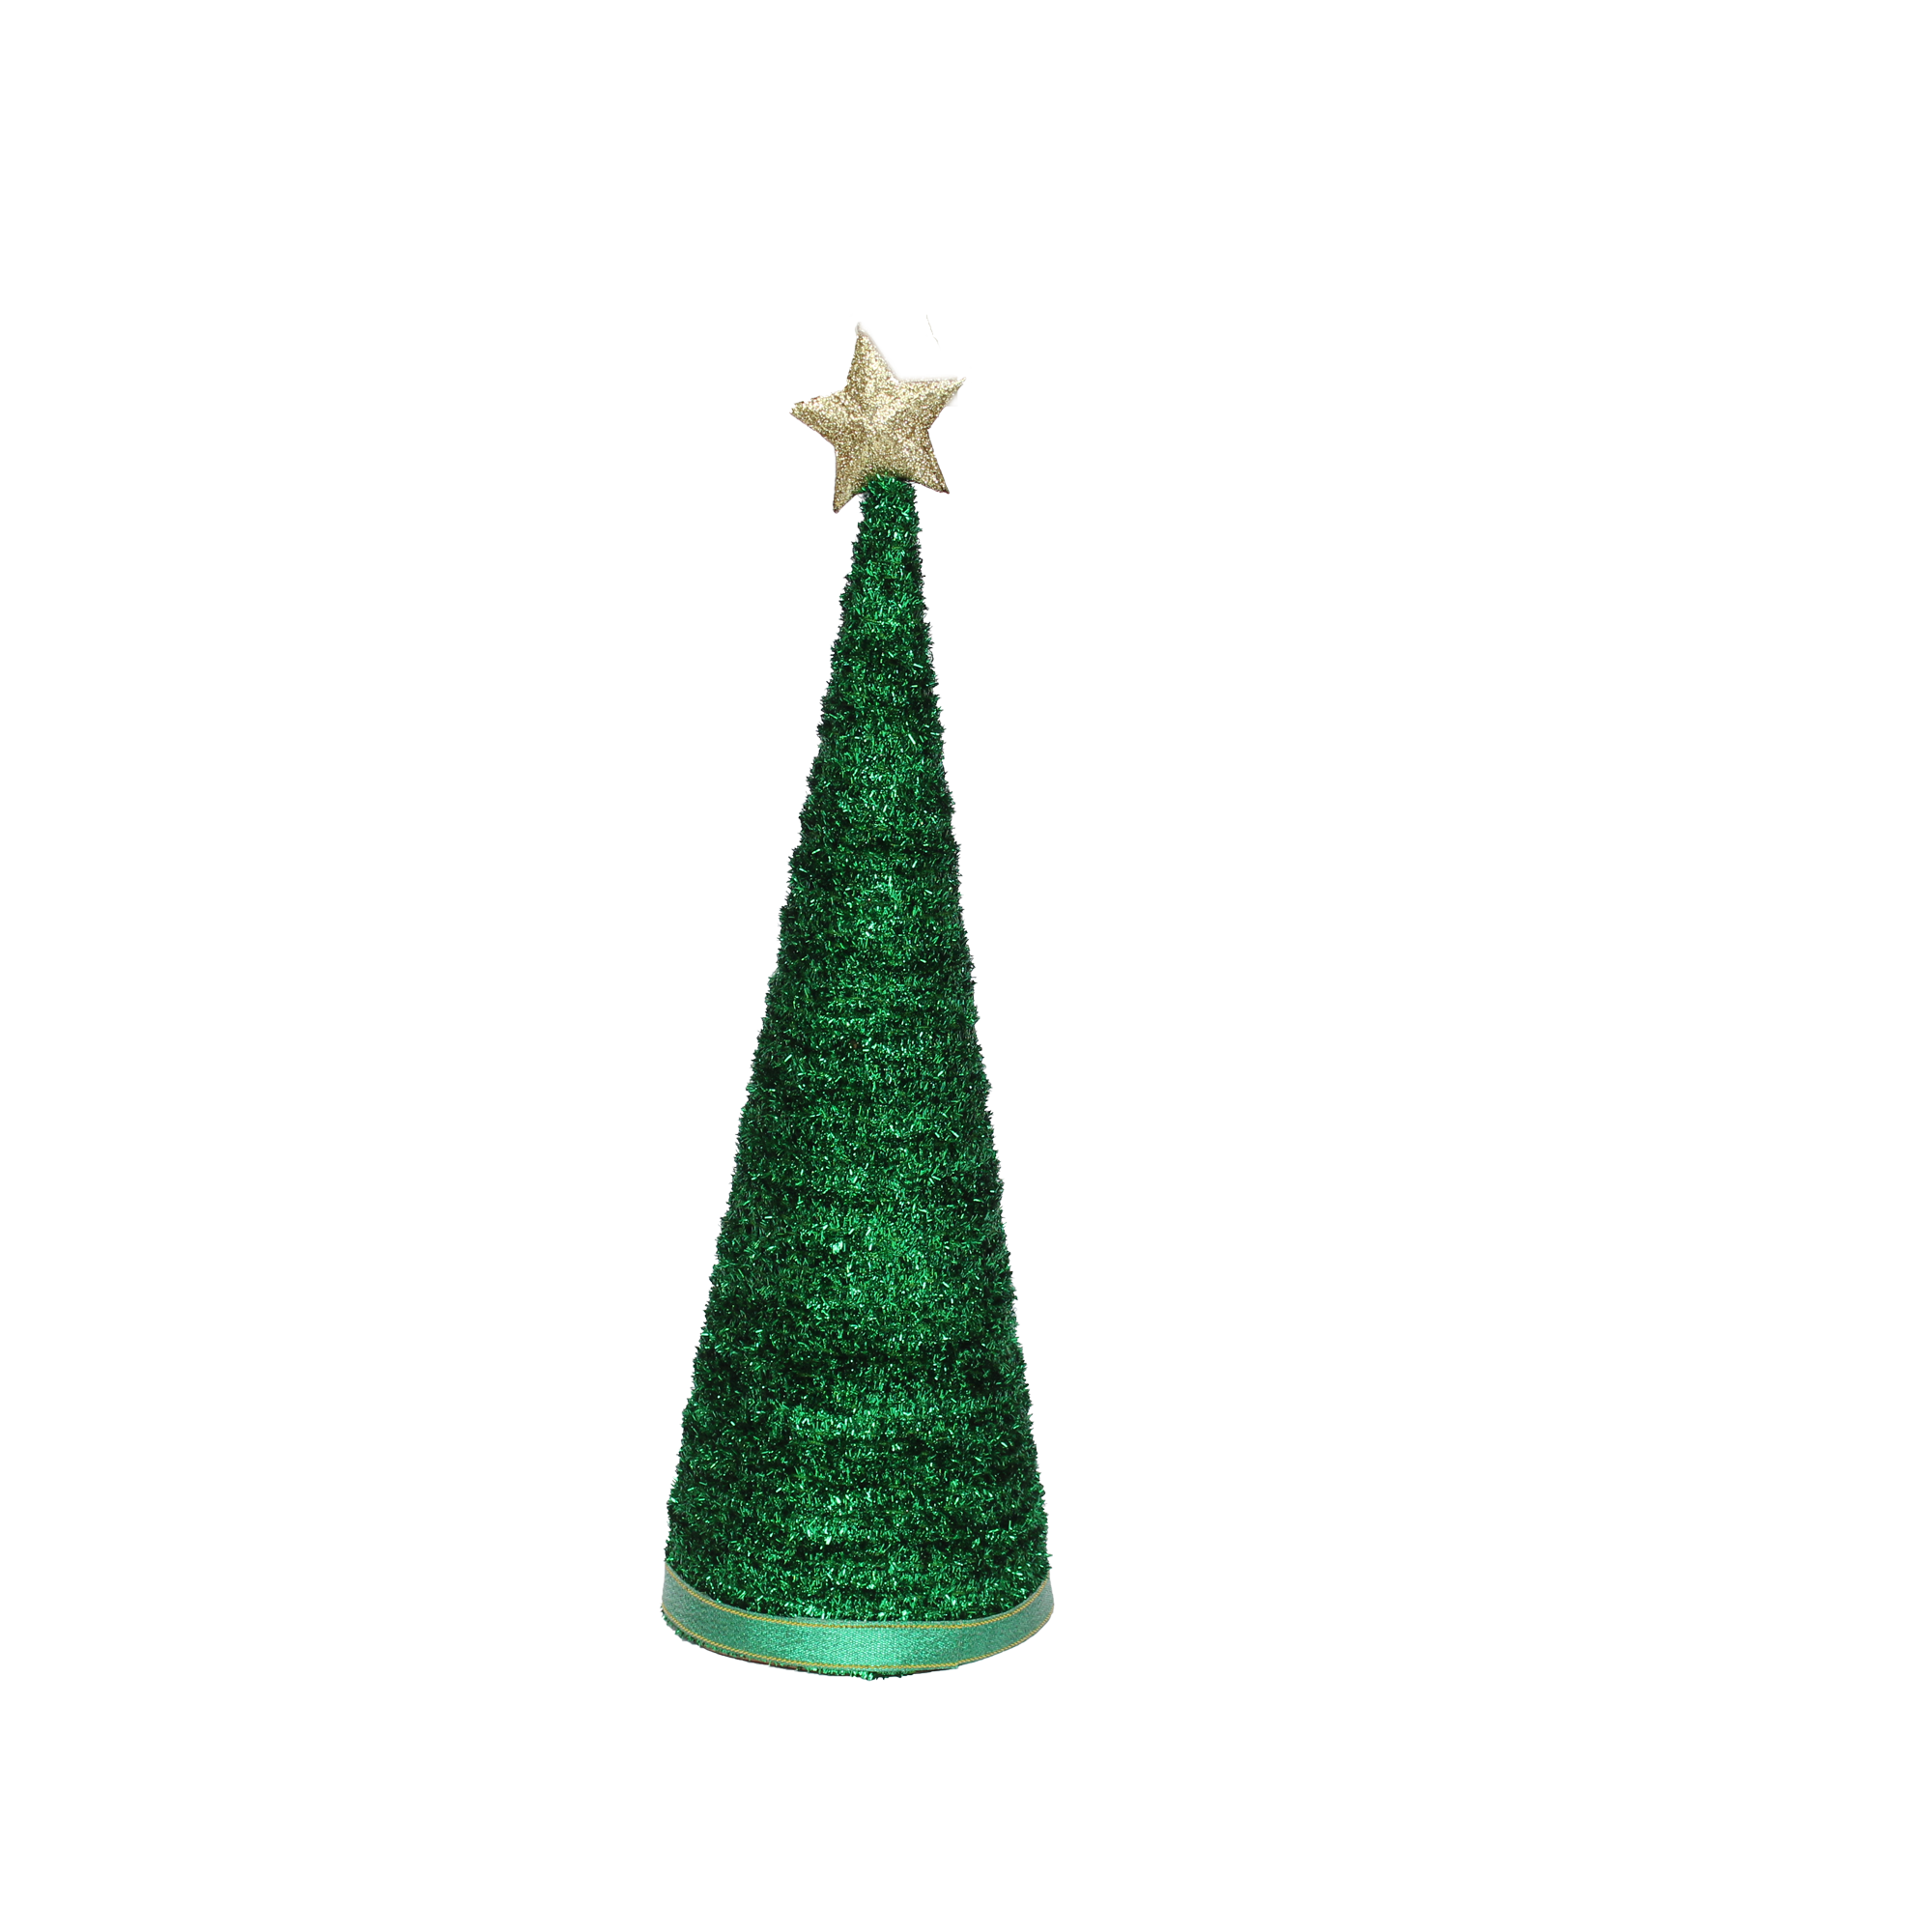 Handmade Conical Christmas Tinsel Tree with Sequins and Star - 14.5 X 4inch, Green, 1pc